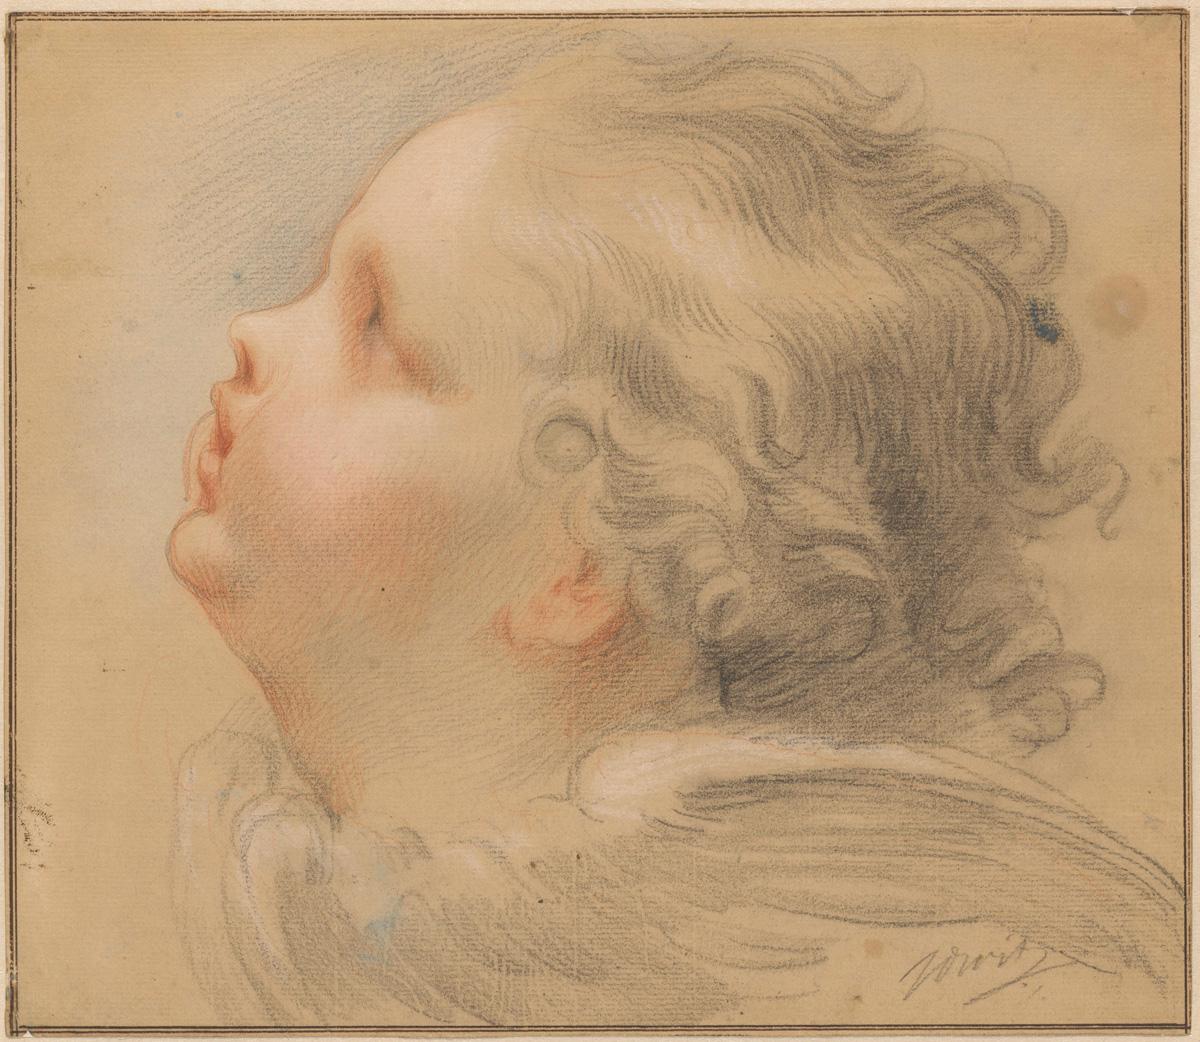 Jacob de Wit (Amsterdam 1695 – 1754 Amsterdam)

A Head of a Putto

Black, white, blue and red chalk, grey wash, black ink framing lines, on yellowish paper, partial watermark crowned shield with French lily, 243 x 313 mm (9.6 x 12.3 inch)

Signed